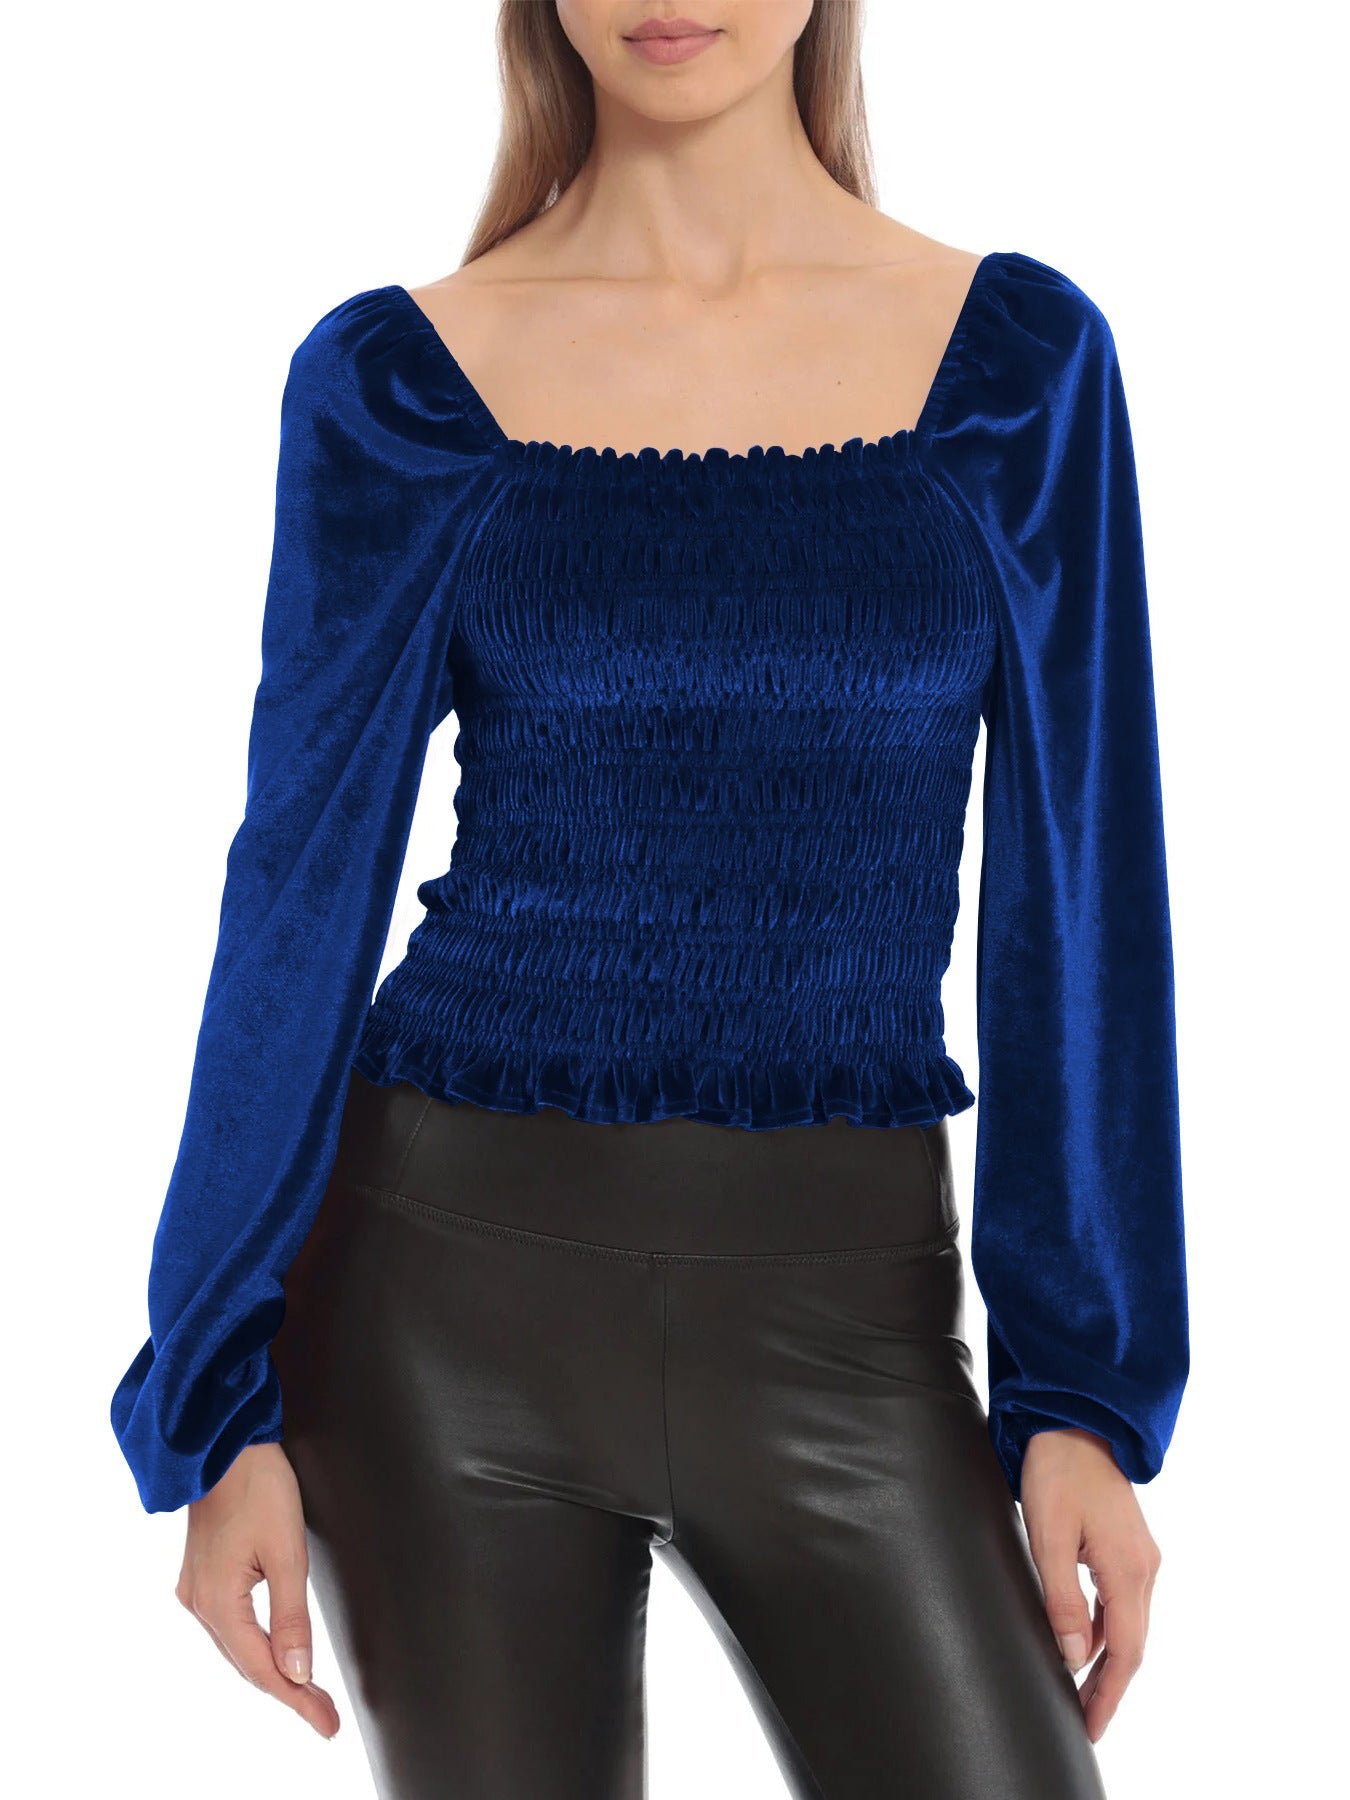 NTG Fad Blue / S French elegant suede long sleeves